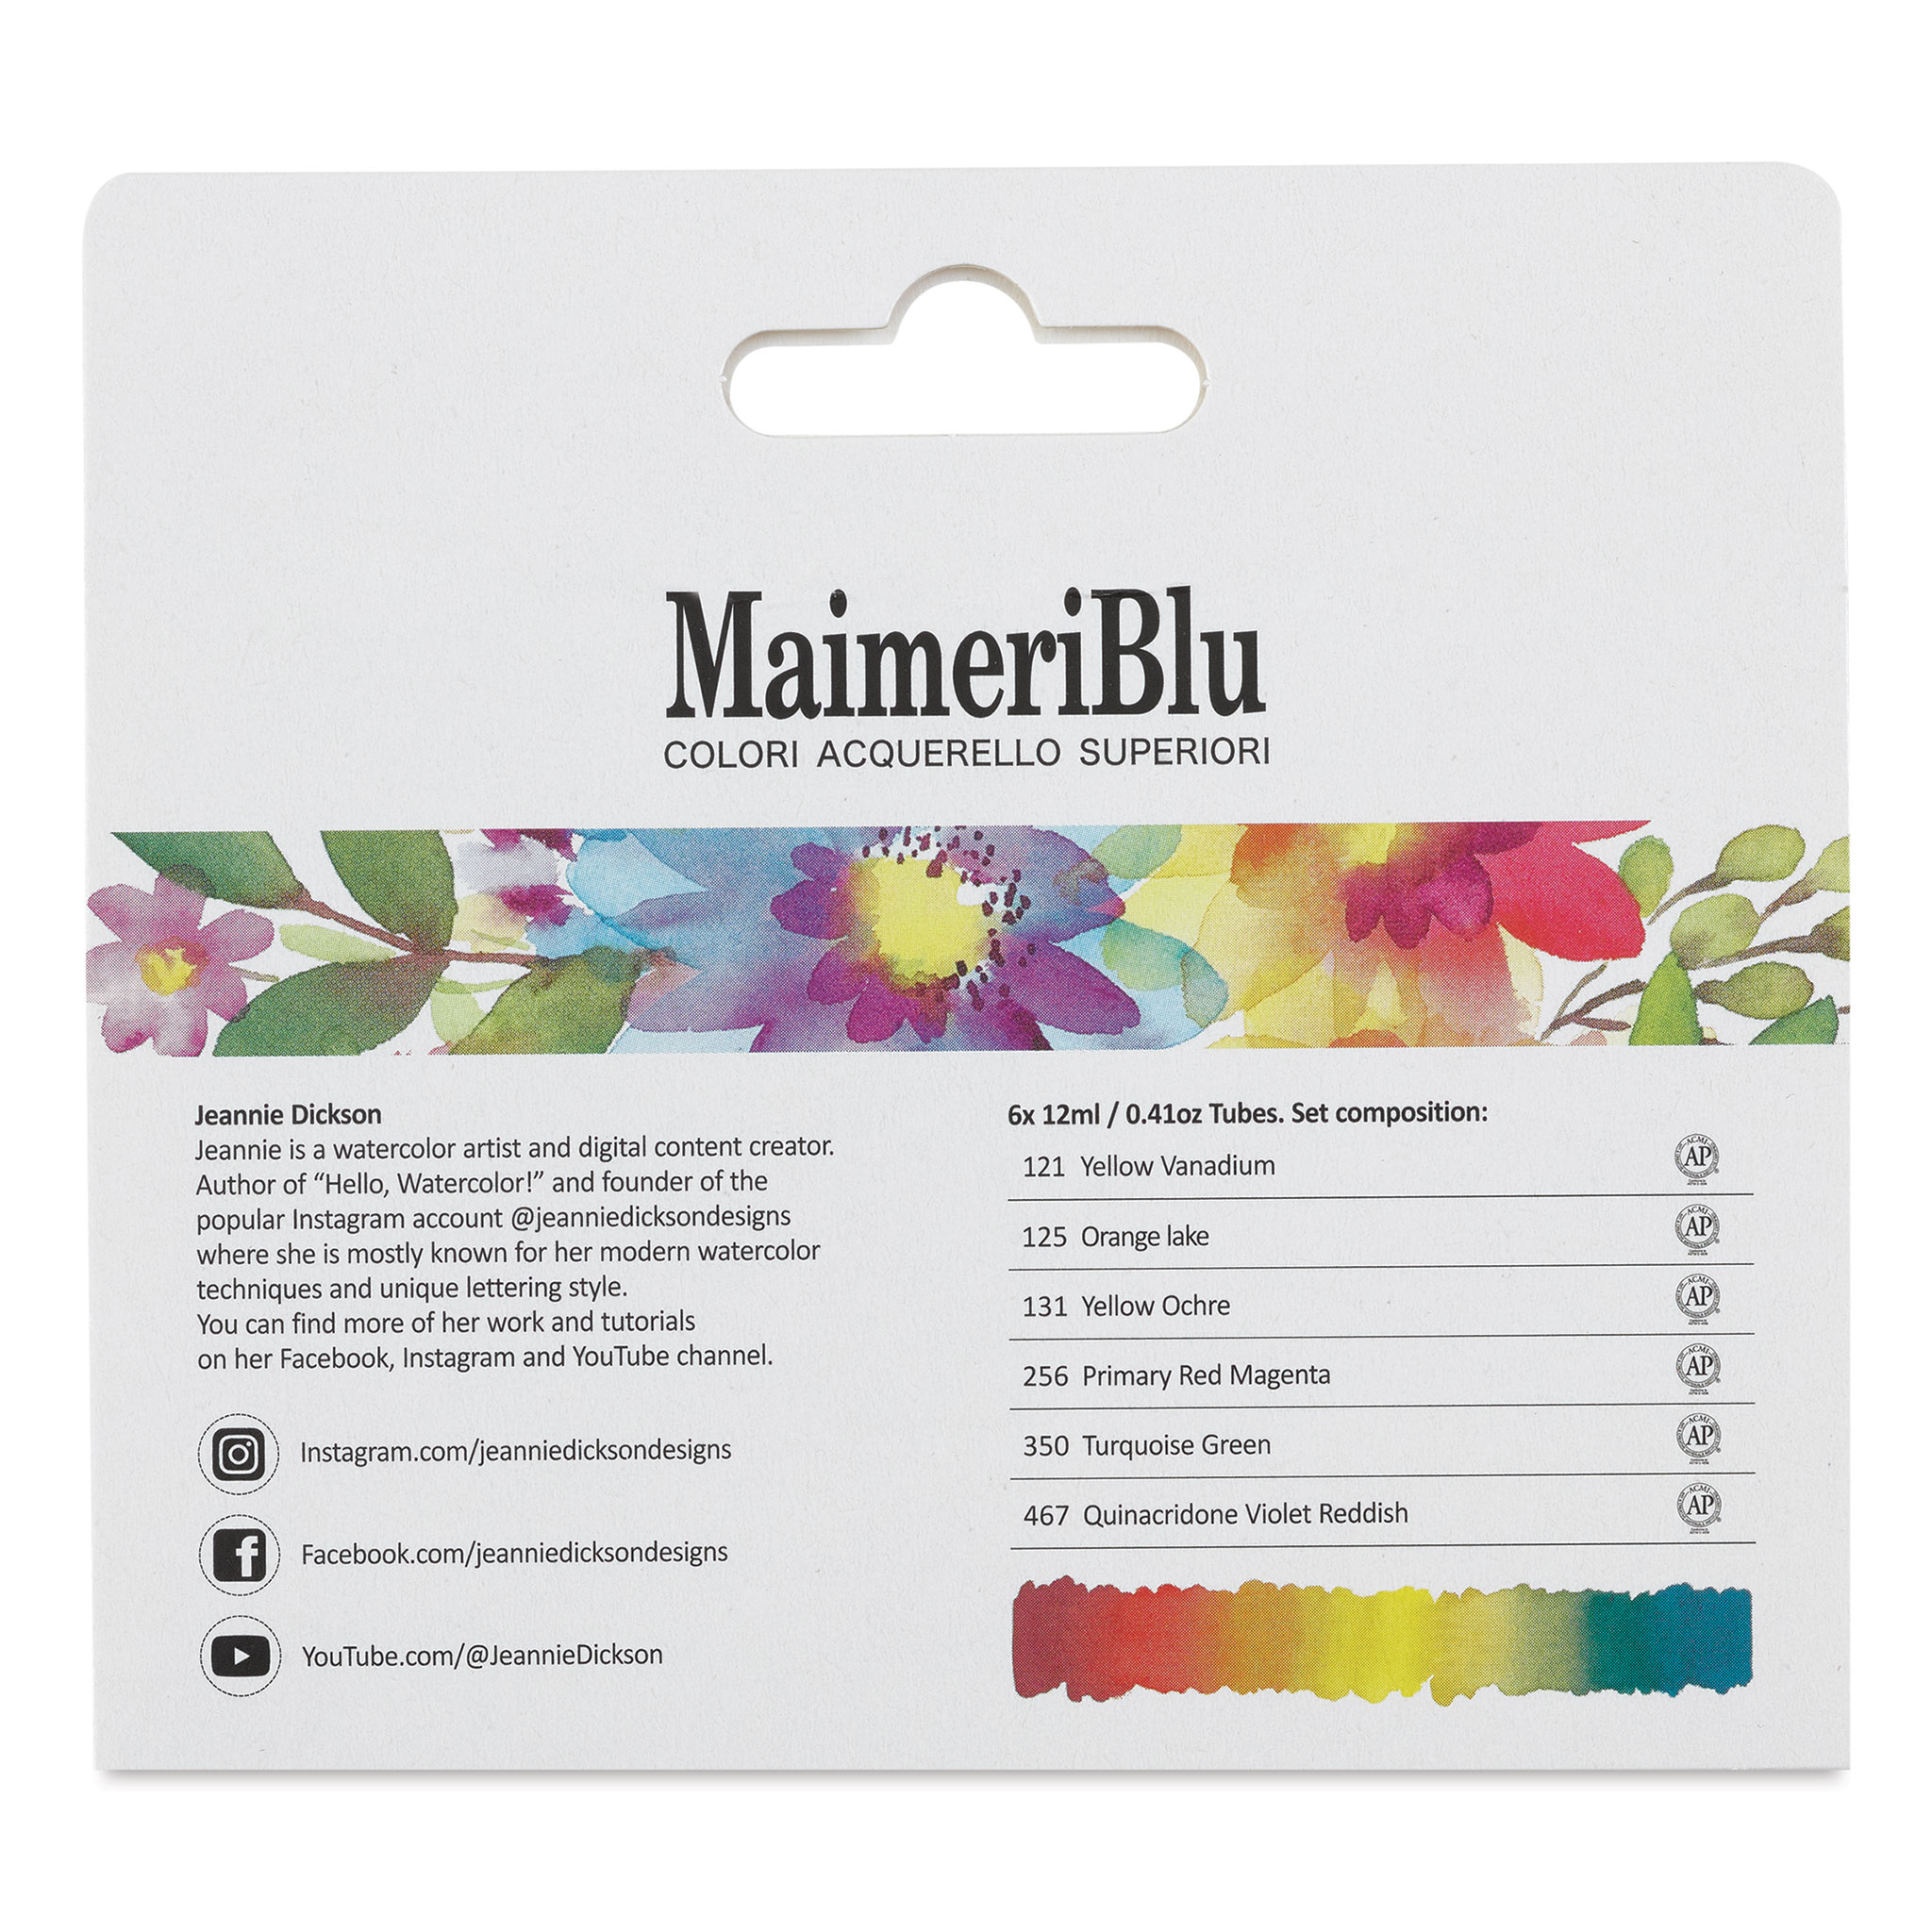 MaimeriBlu and Princeton Artist Brush, Jenna Rainey Artist Set, Watercolor  Paint, 12ml, 6 Tubes – Includes Velvetouch Blooms Brush – Professional  Watercolor - The Art Store/Commercial Art Supply